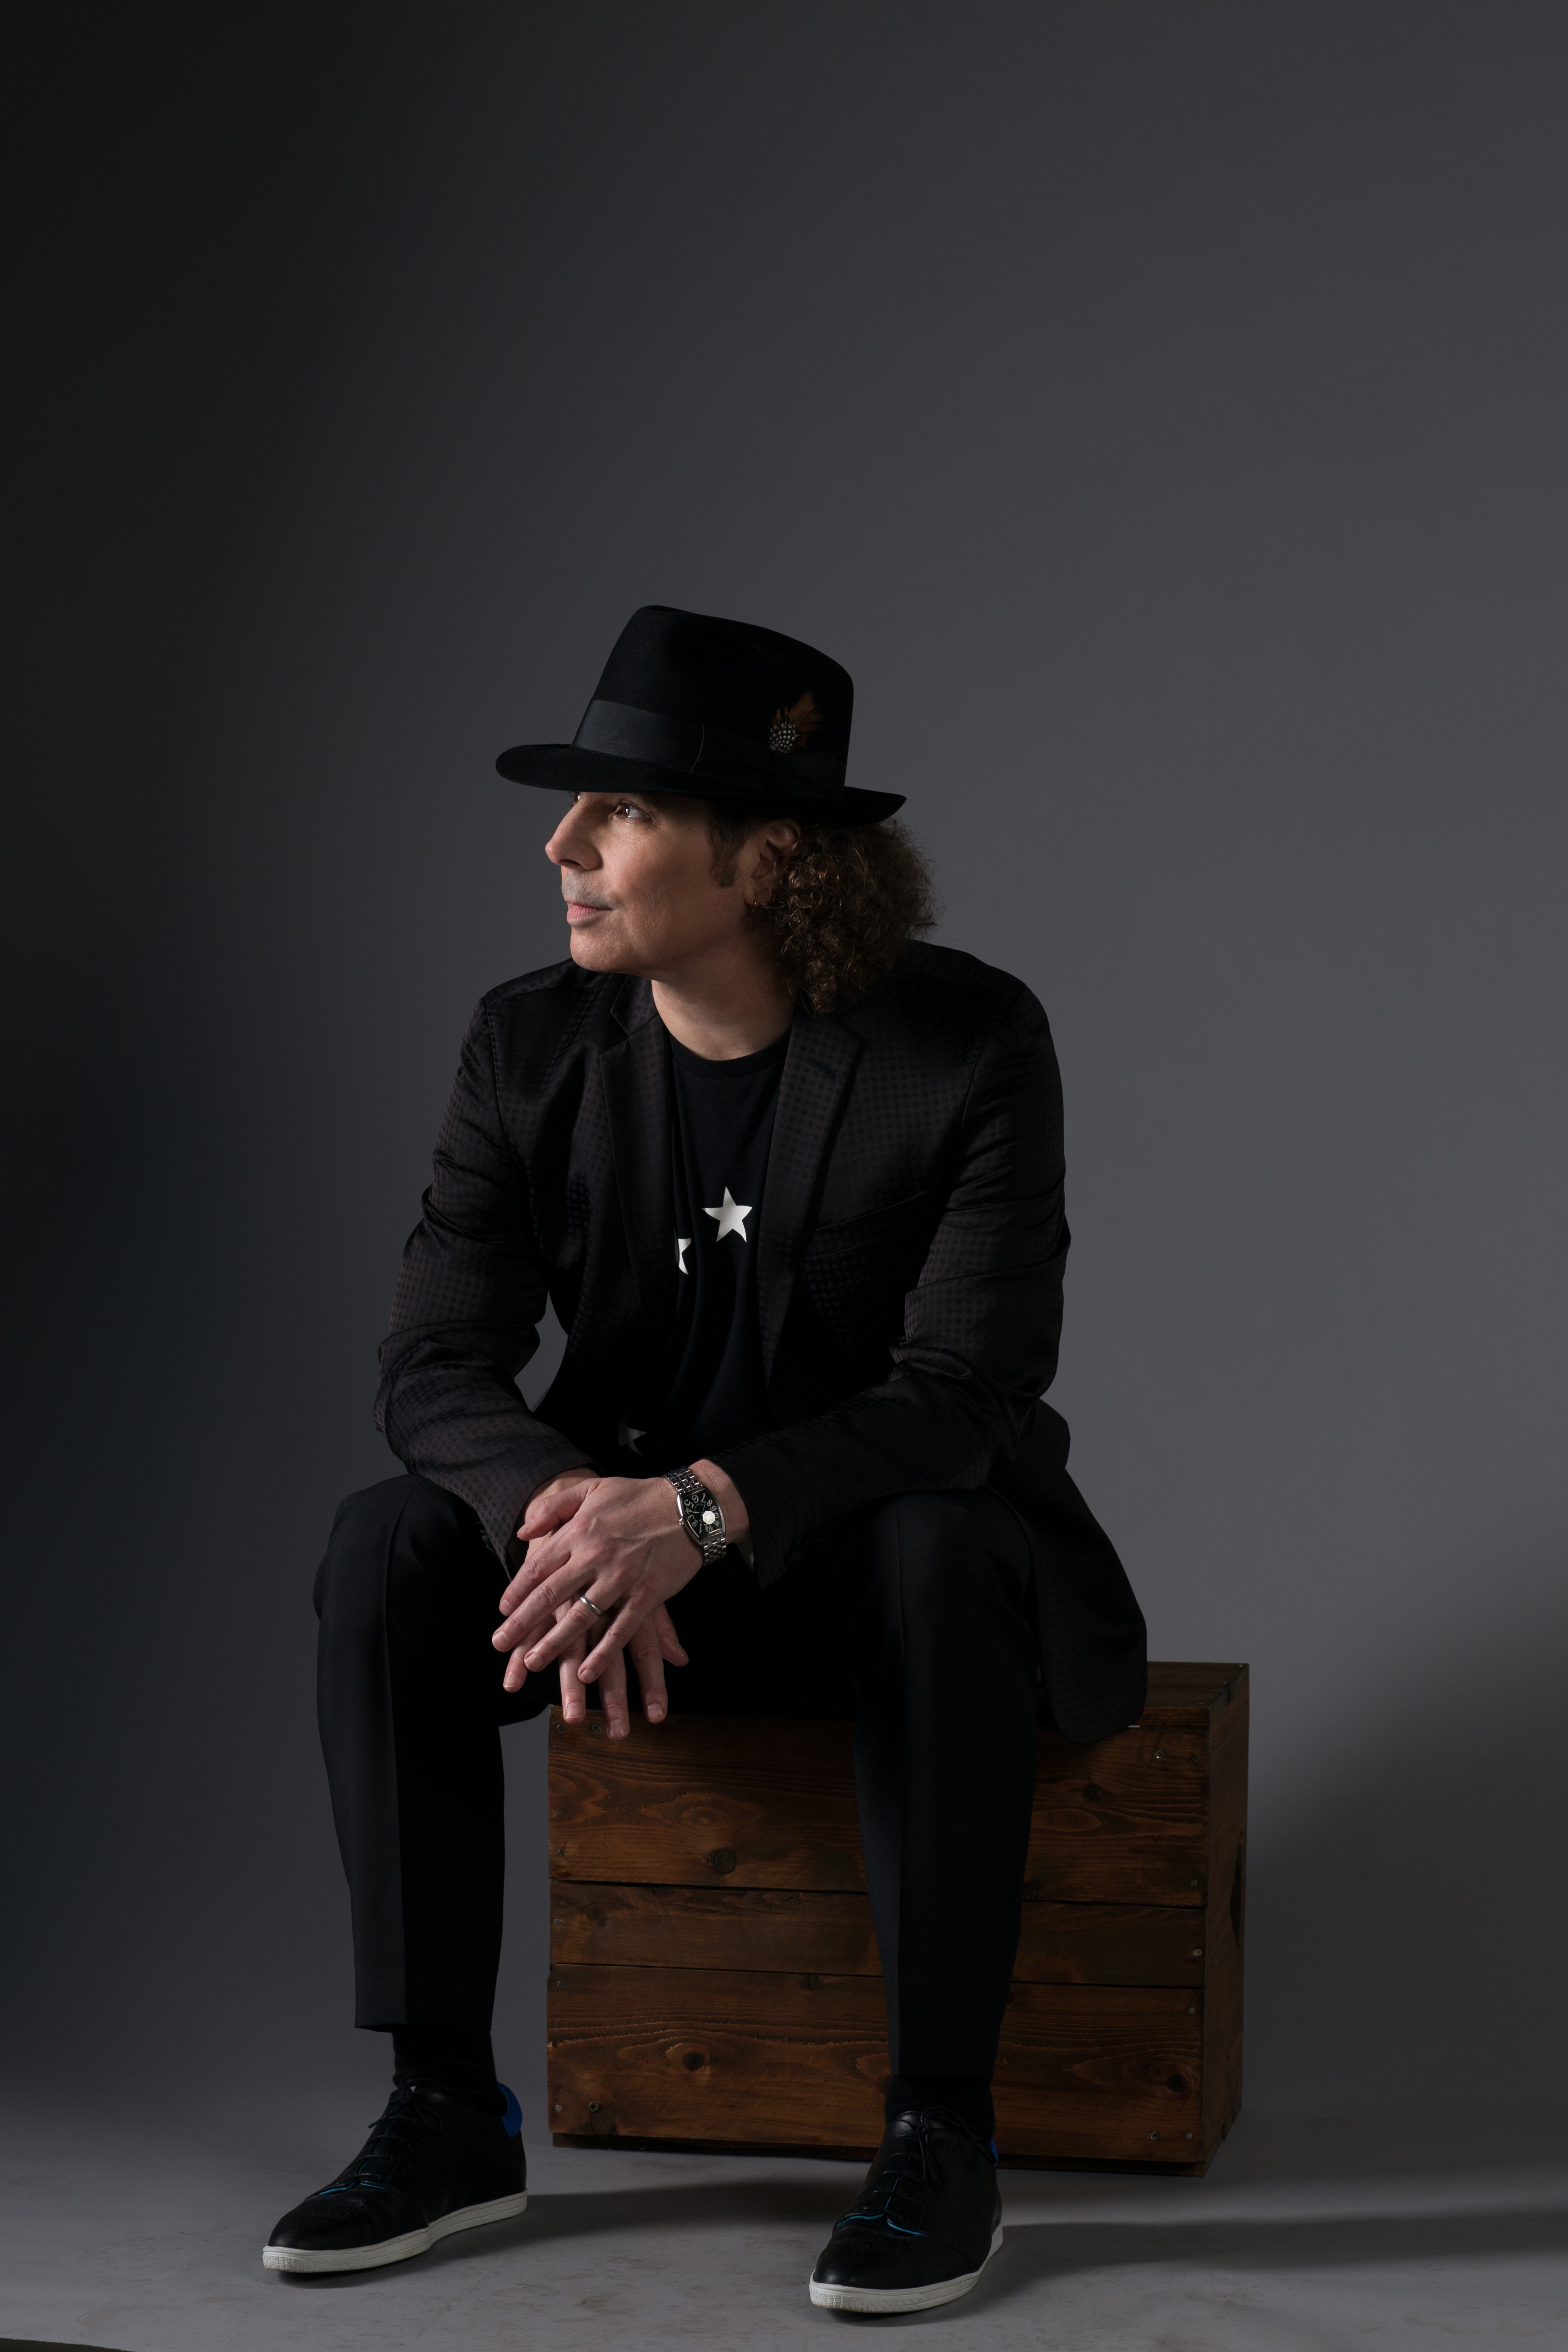 Grammy nominated saxophonist Boney James kicks off Smooth Jazz New York's 2015 Smooth Cruise series on opening night, June 24 aboard the Hornblower Infinity in NYC.